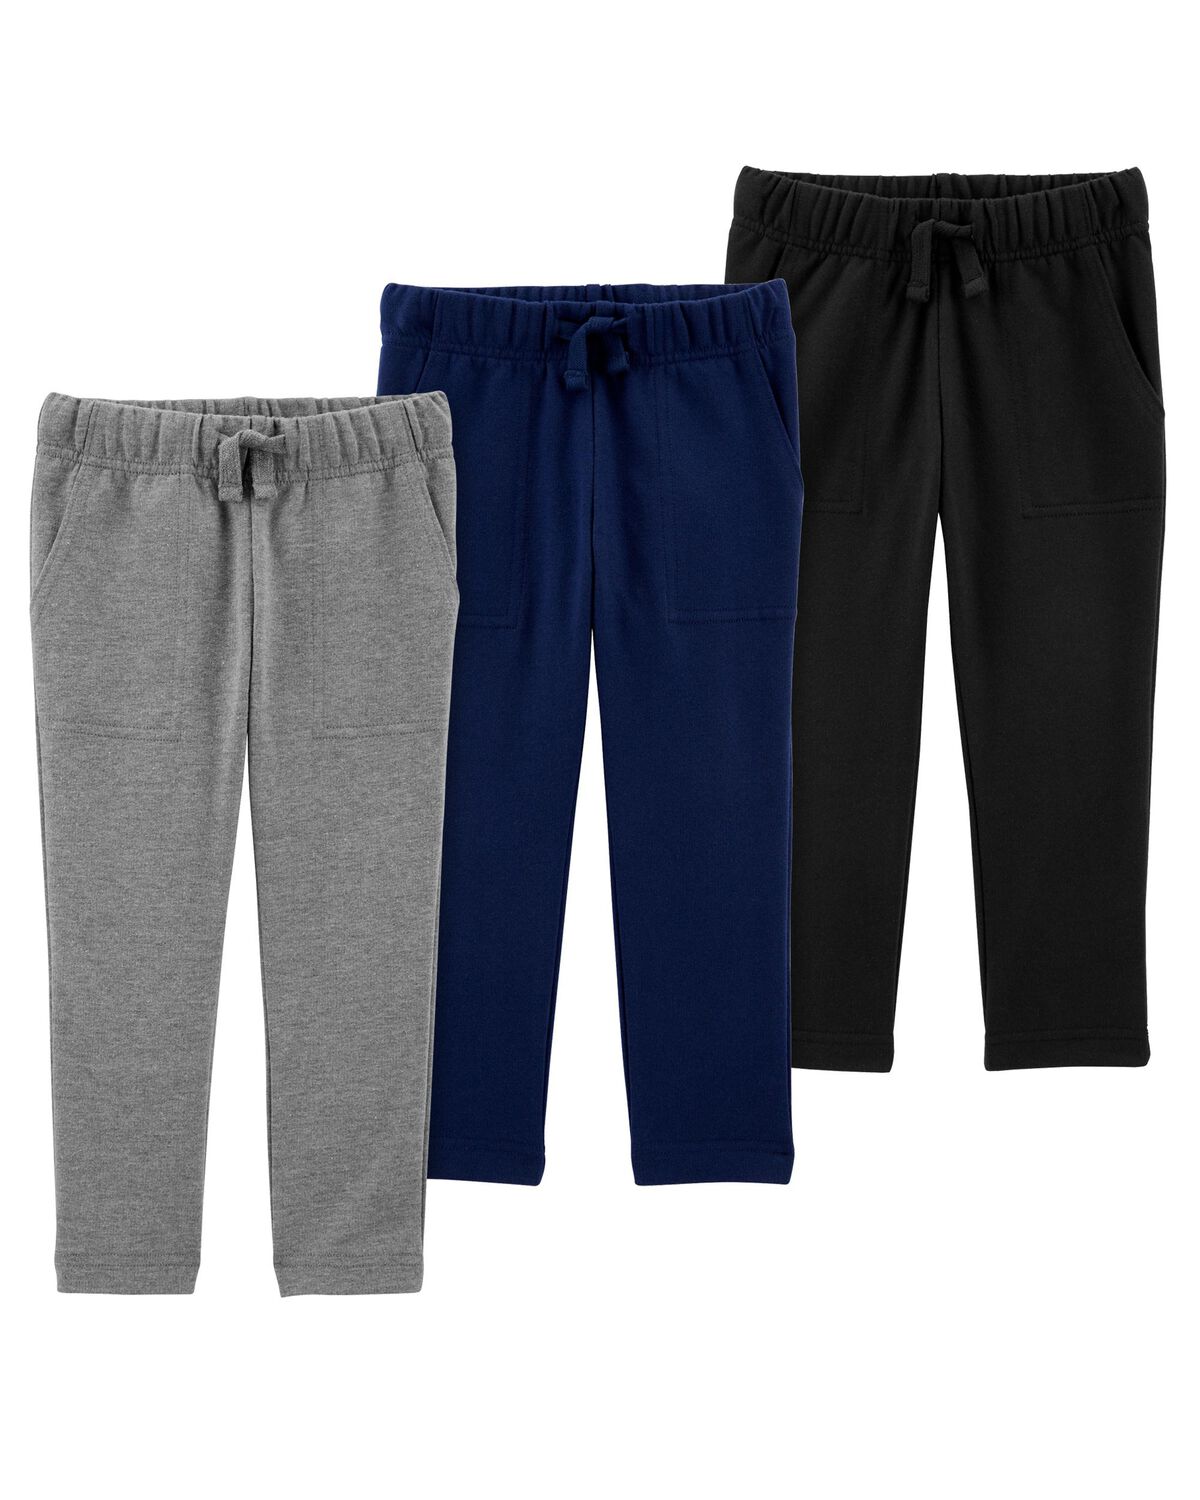 Multi Baby 3-Pack French Terry Drawstring Joggers Set | carters.com